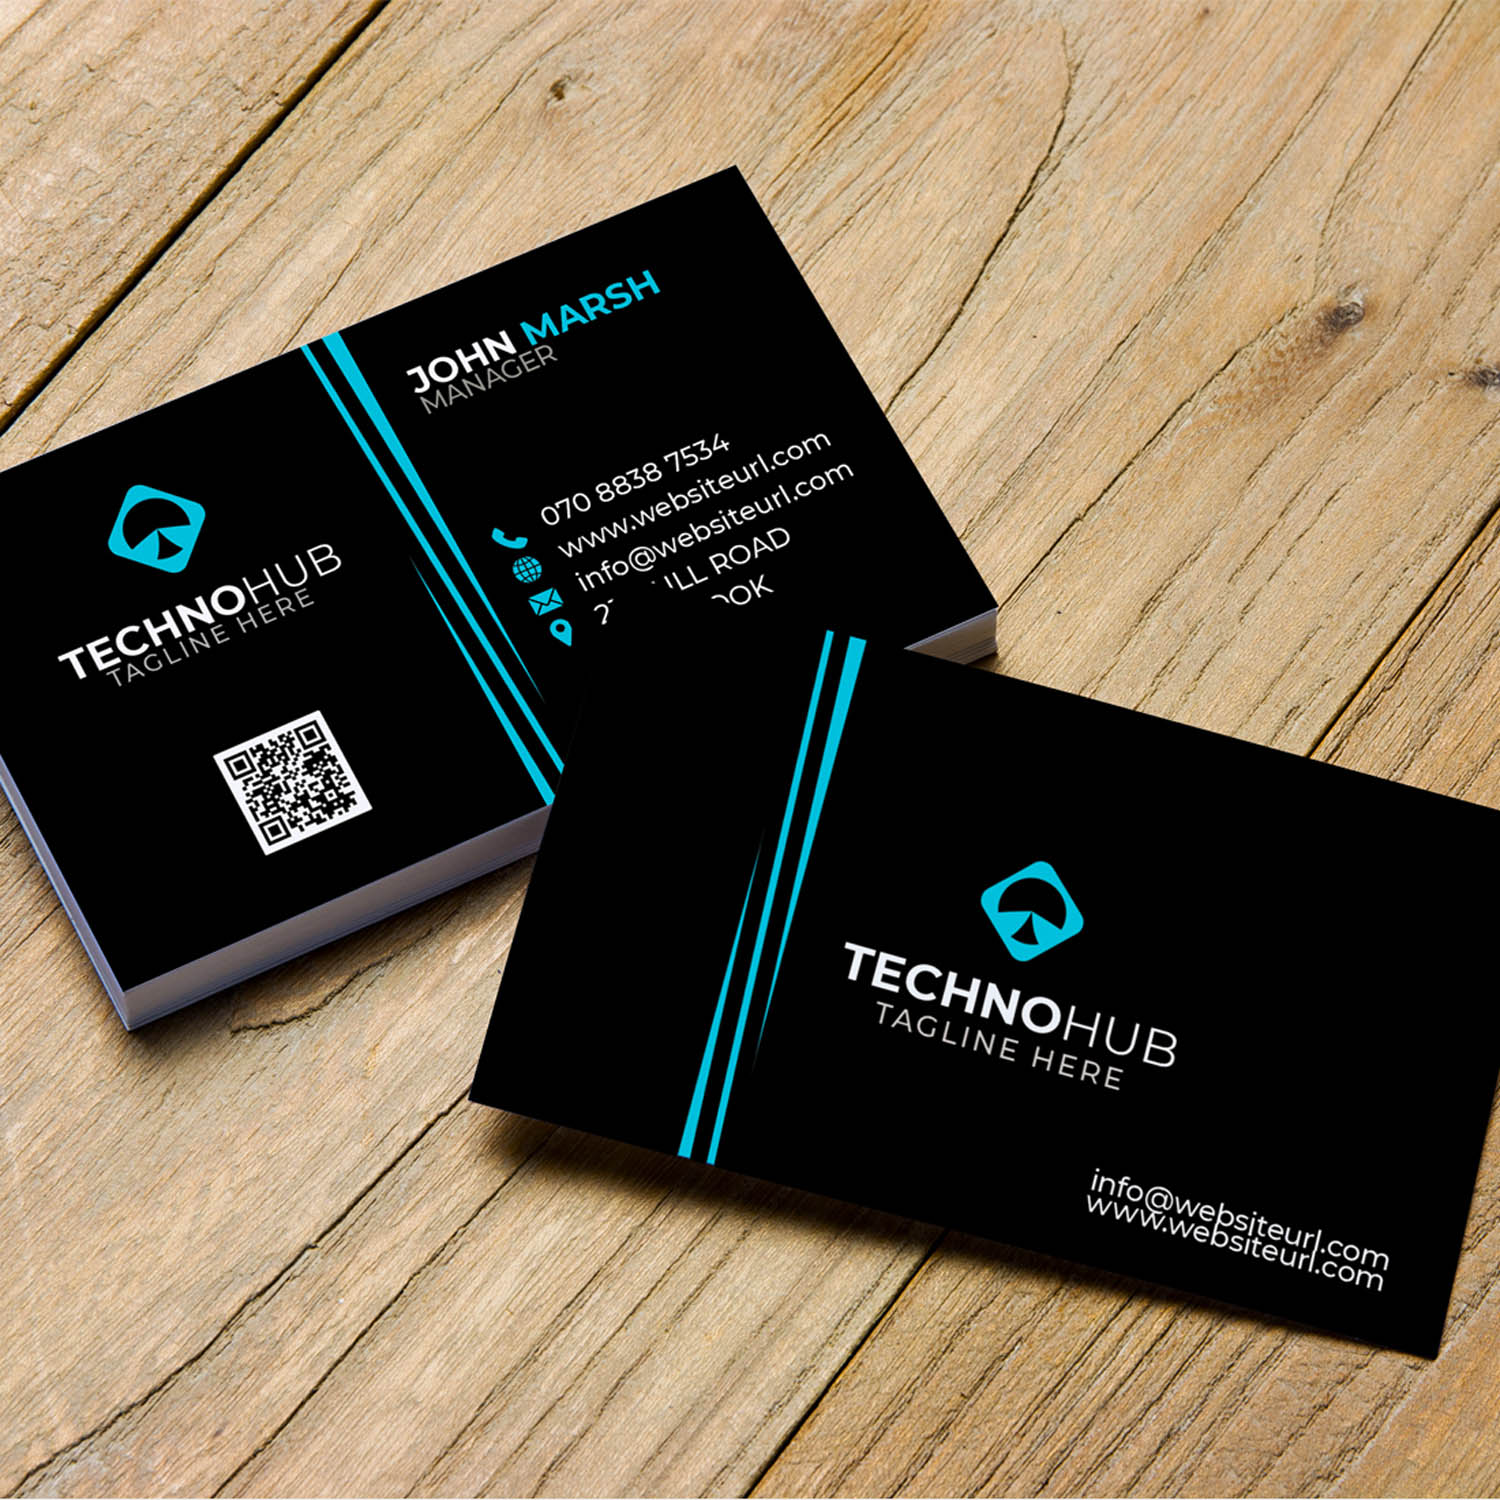 Creative & Modern Business Card Template in 3 Color vareation | 6 PSD Files incluede.